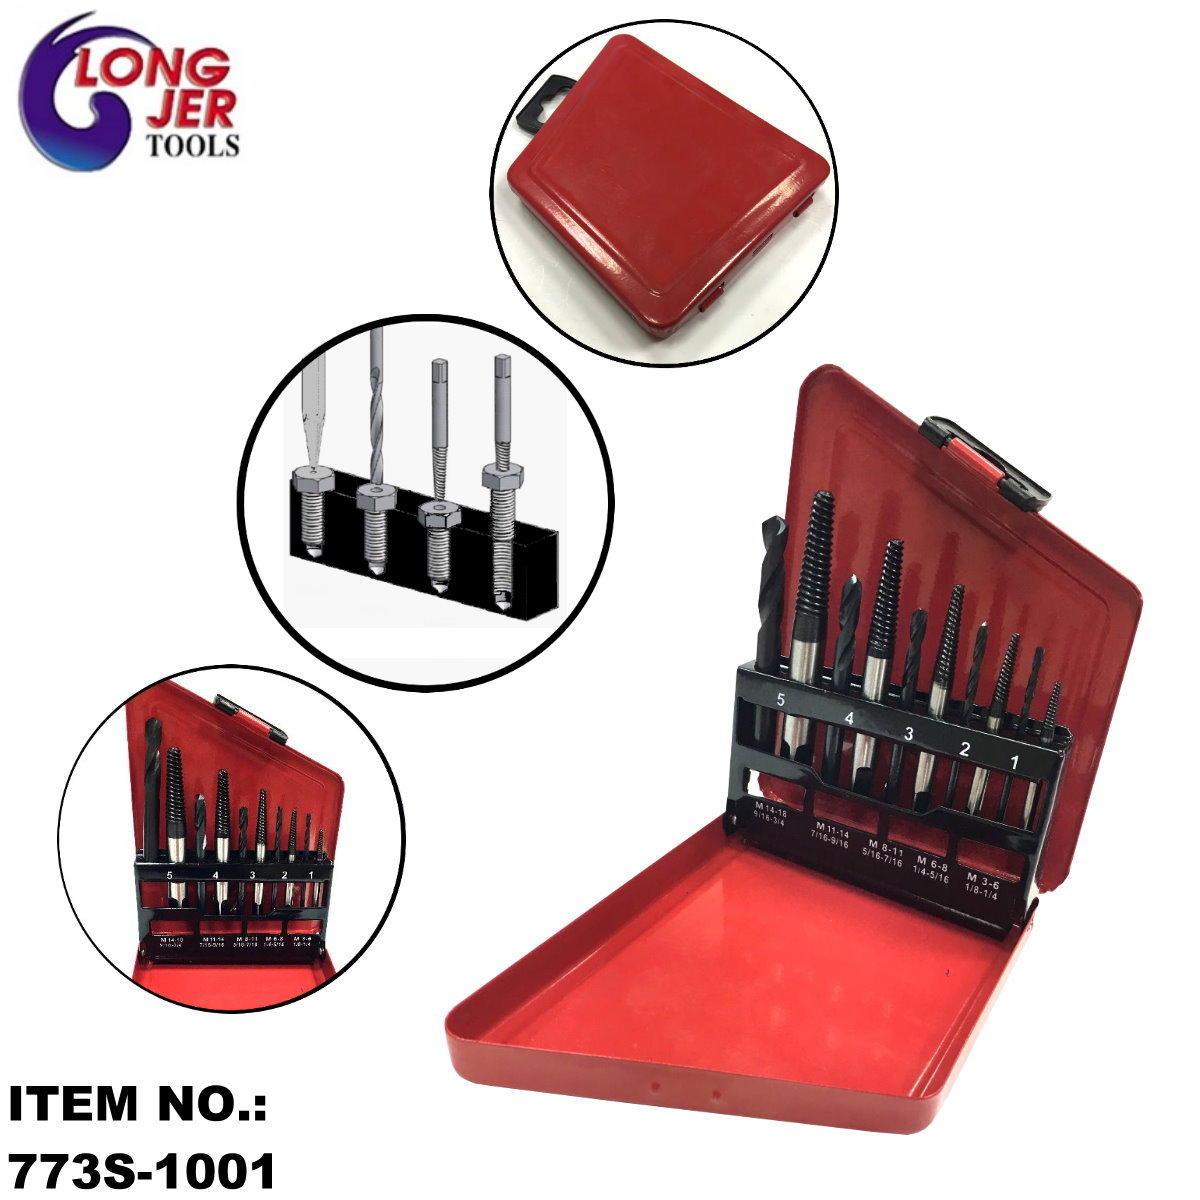 10PC SCREW EXTRACTOR AND DRILL BIT SET FOR REPAIR TOOLS